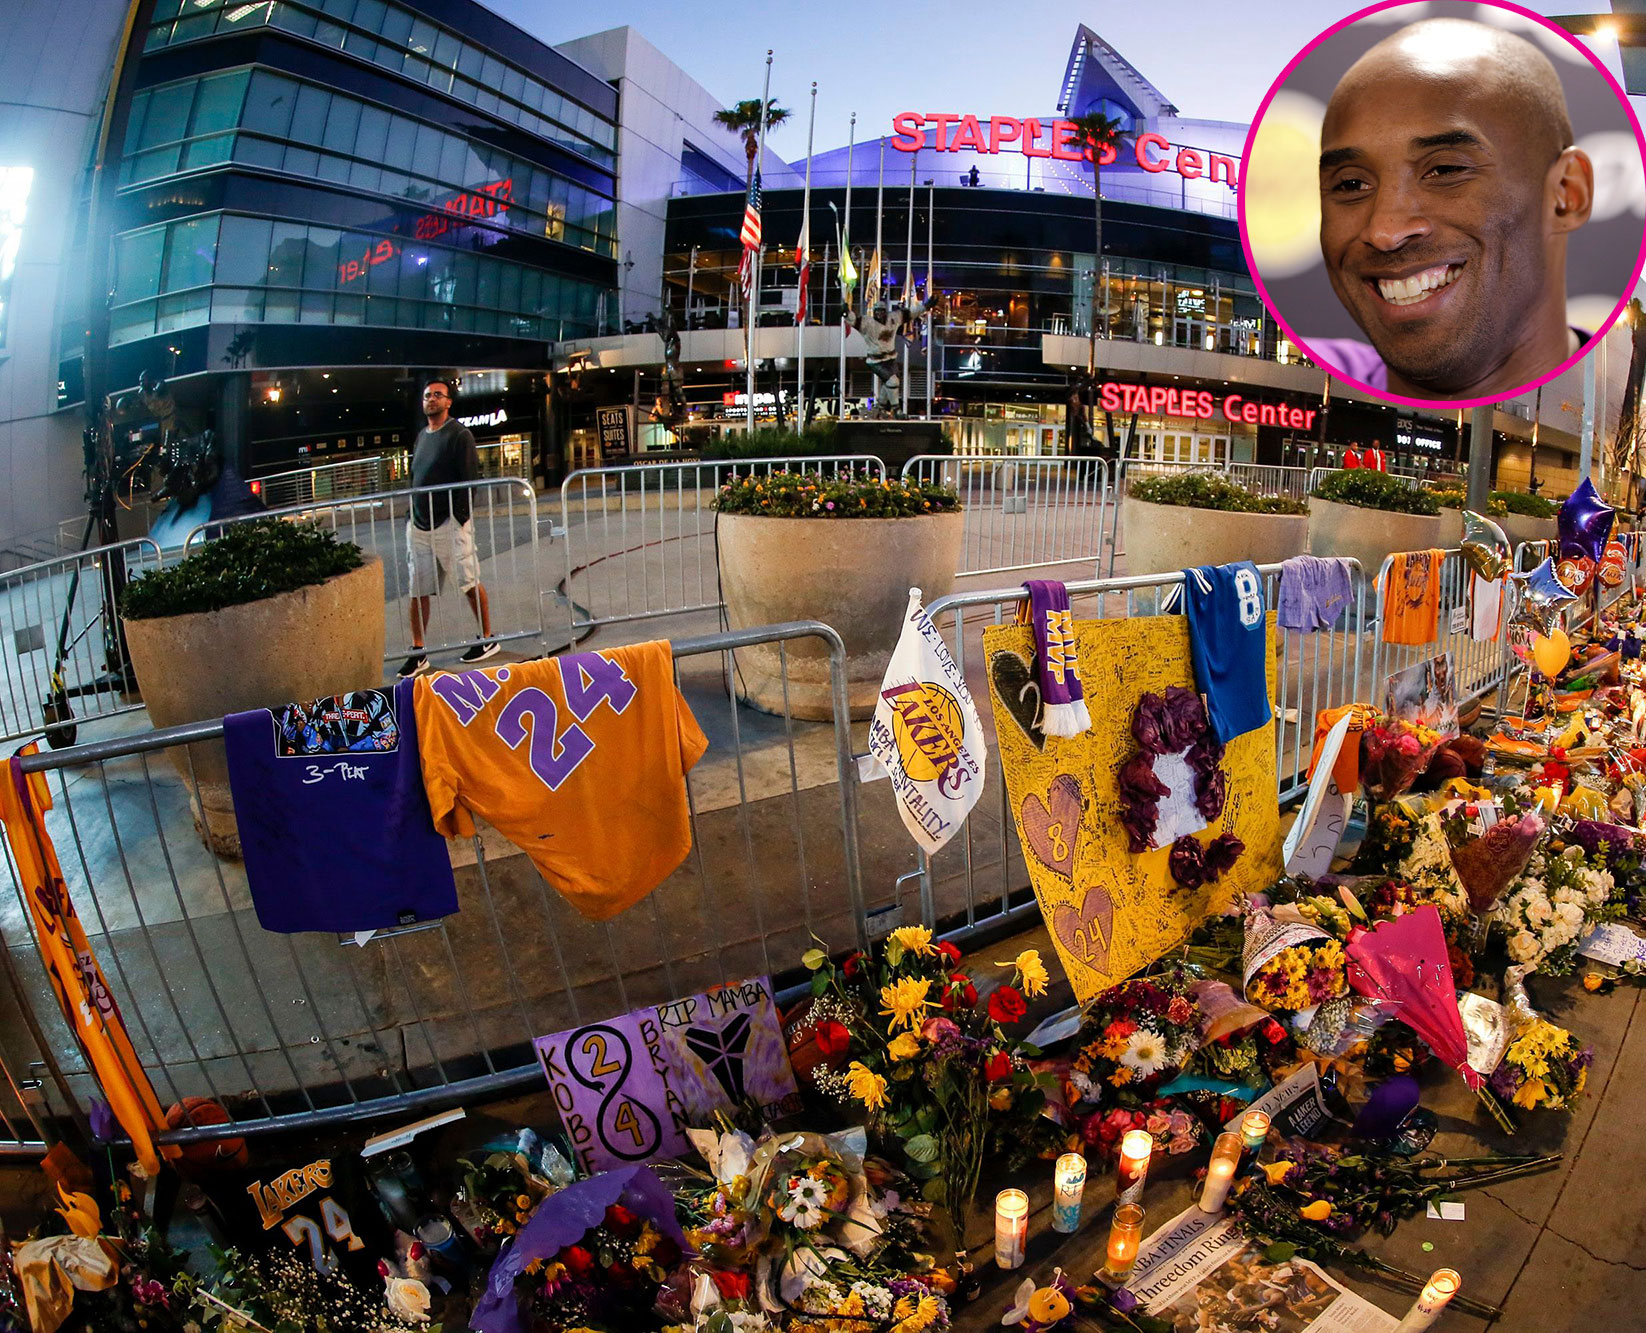 Kobe Bryant: Photos of former Los Angeles Lakers star through the years